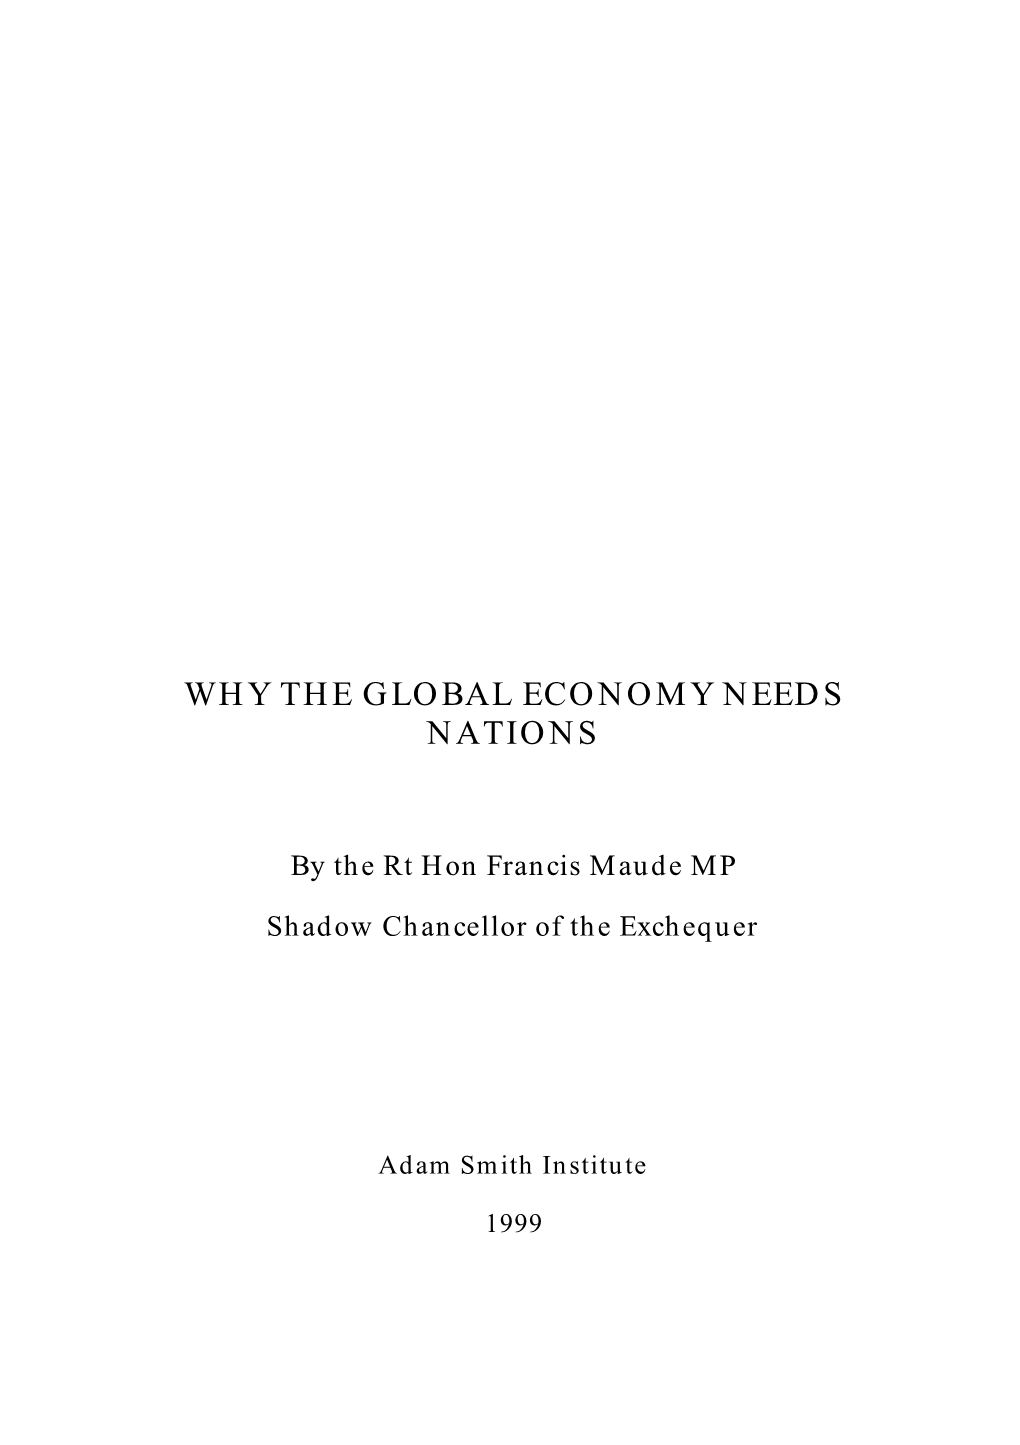 Why the Global Economy Needs Nations